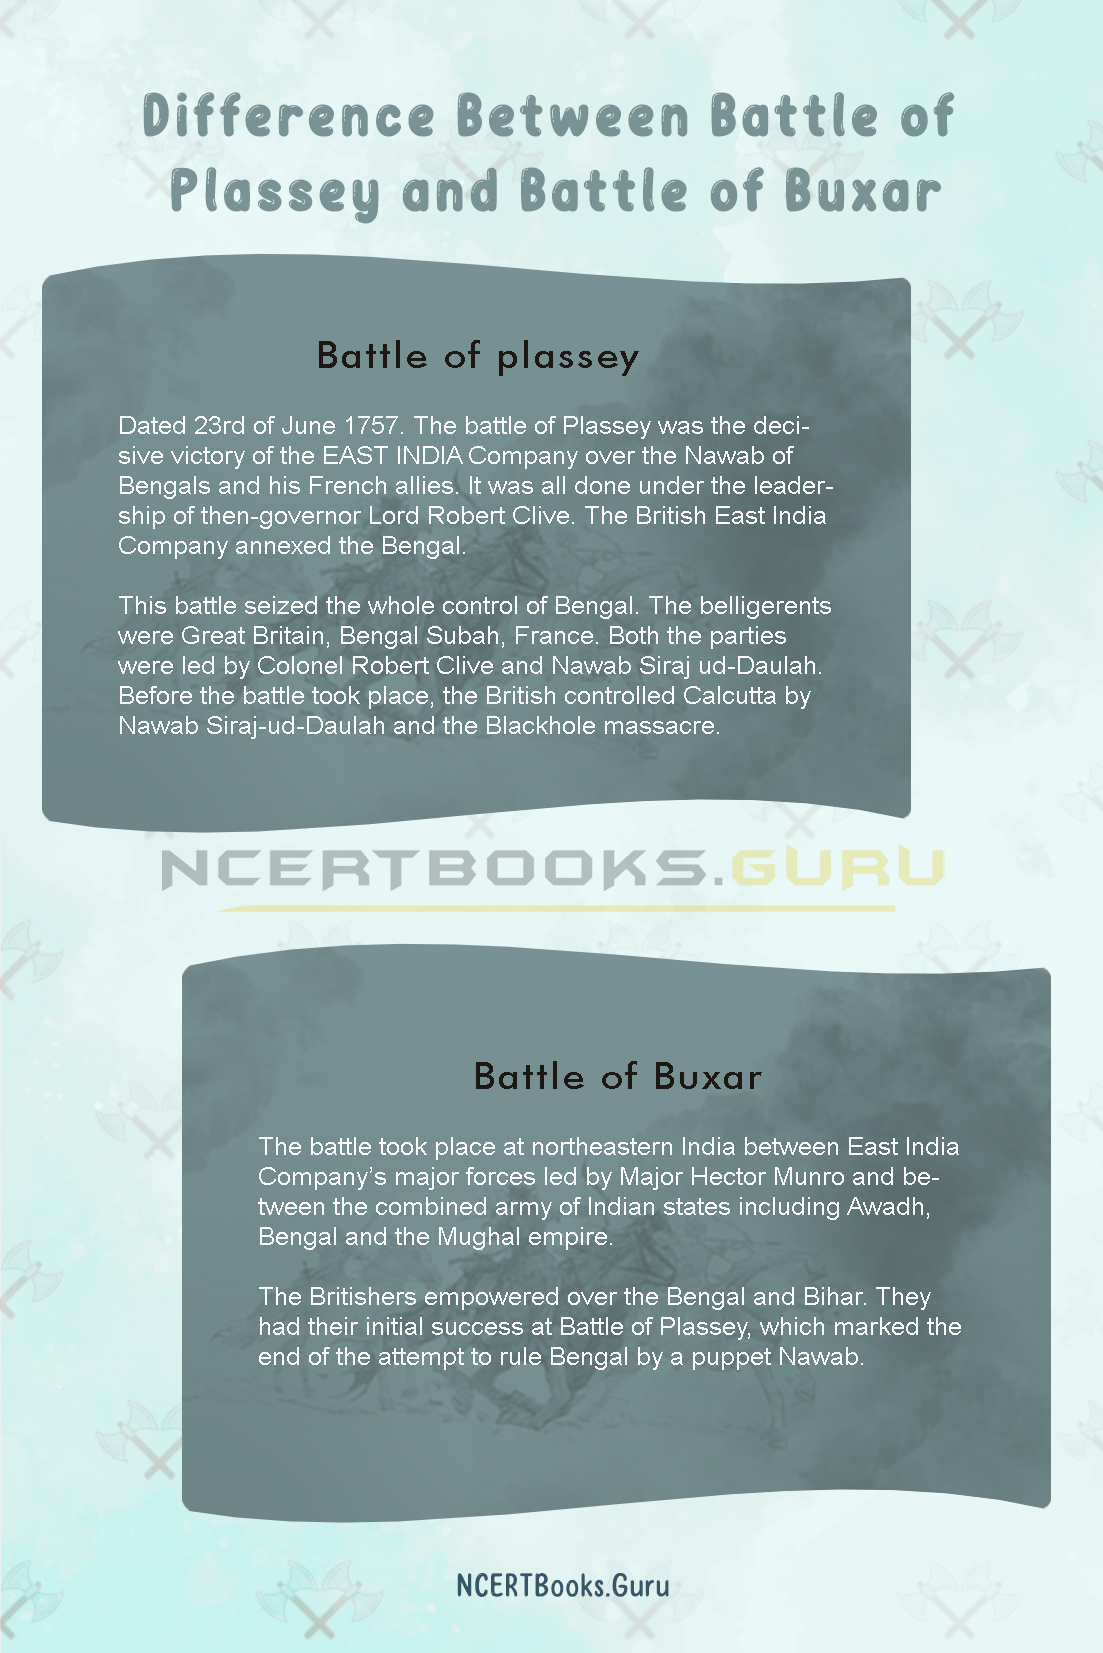 Difference Between Battle of Plassey and Battle of Buxar